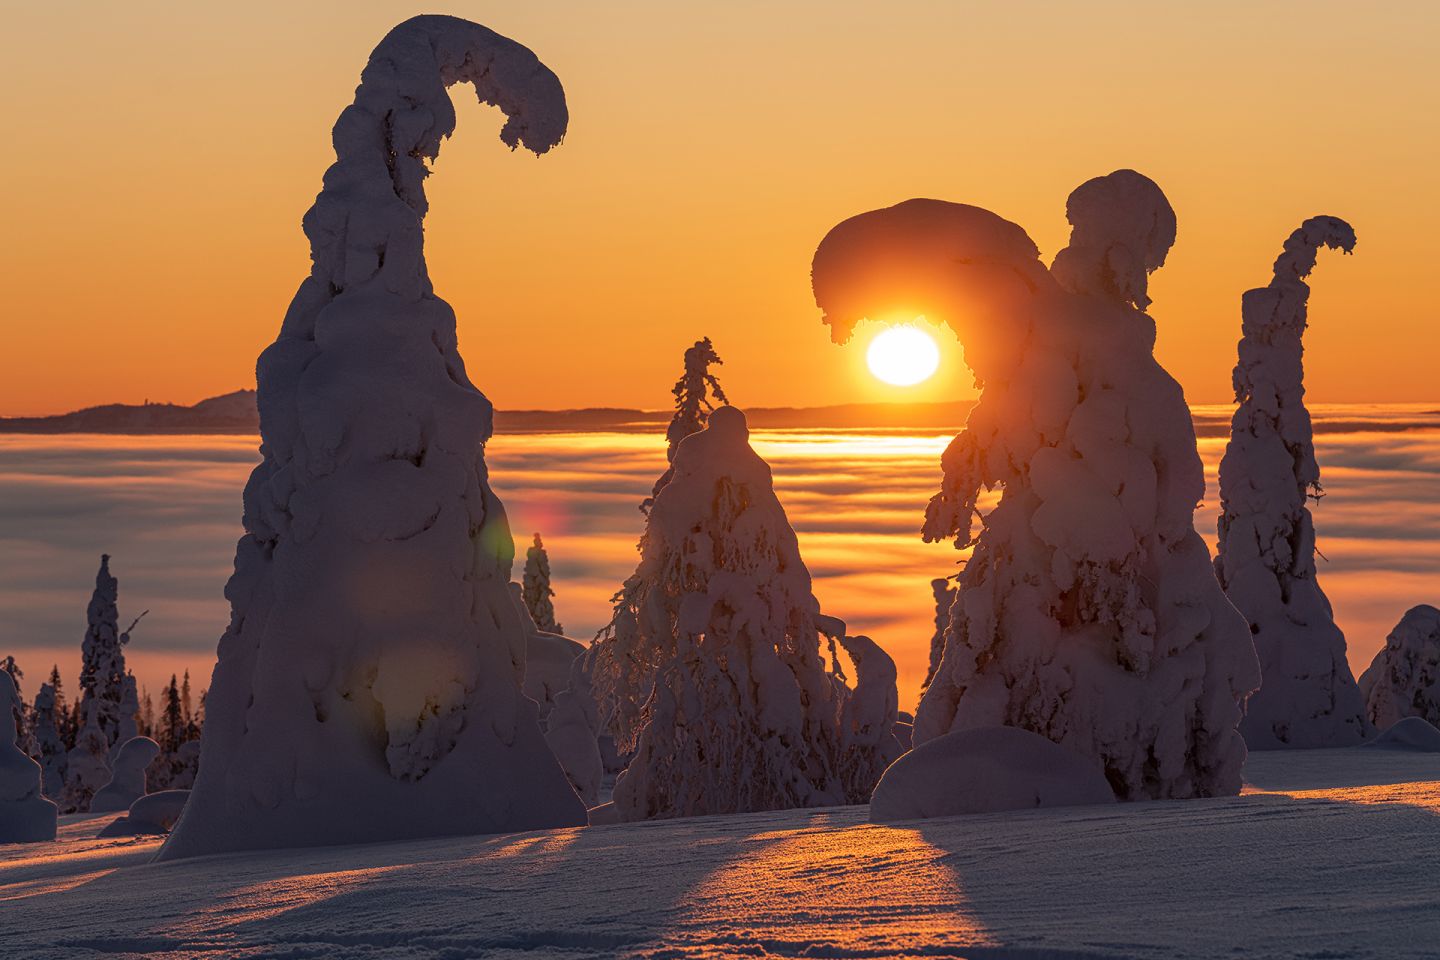 Crown snow-load in Riisitunturi National Park in Posio, Lapland, Finland